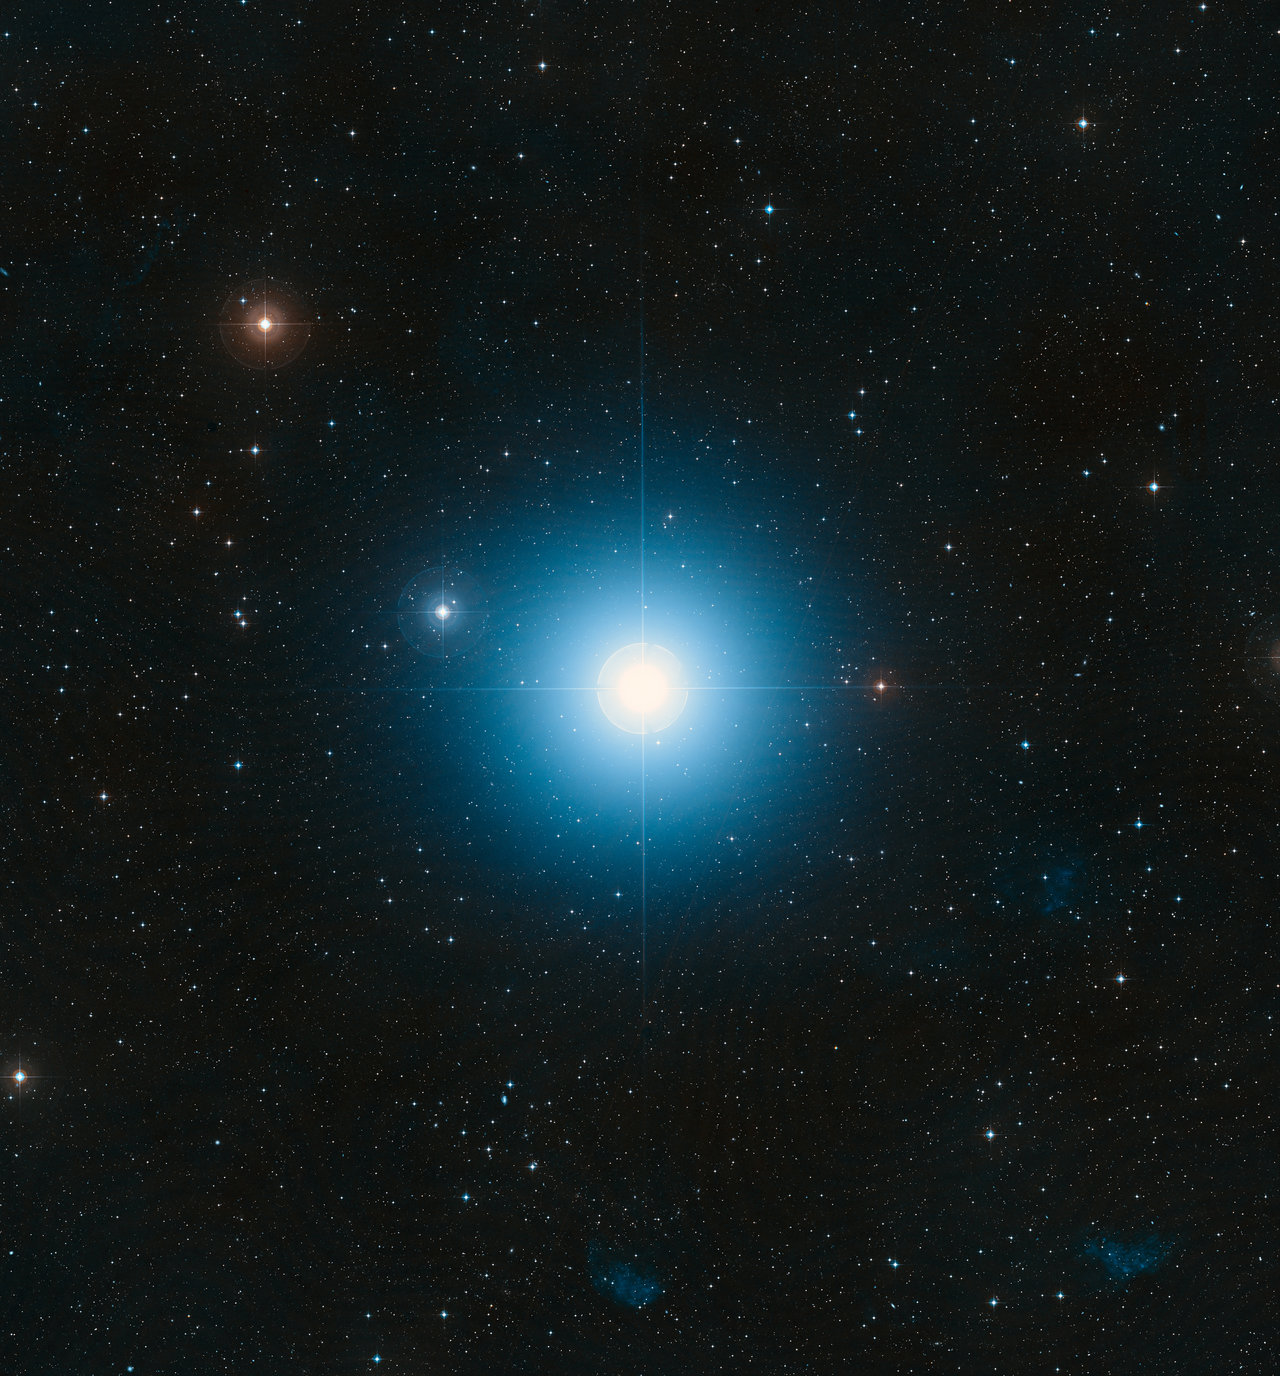 This image, created from photographs, shows the bright star Fomalhaut, host star to exoplanet Dagon. Named after a Semitic deity, 'Dagon' is one of 45 new star and planet names chosen by a public vote. Image credit: NASA/ESA/Digitized Sky Survey 2